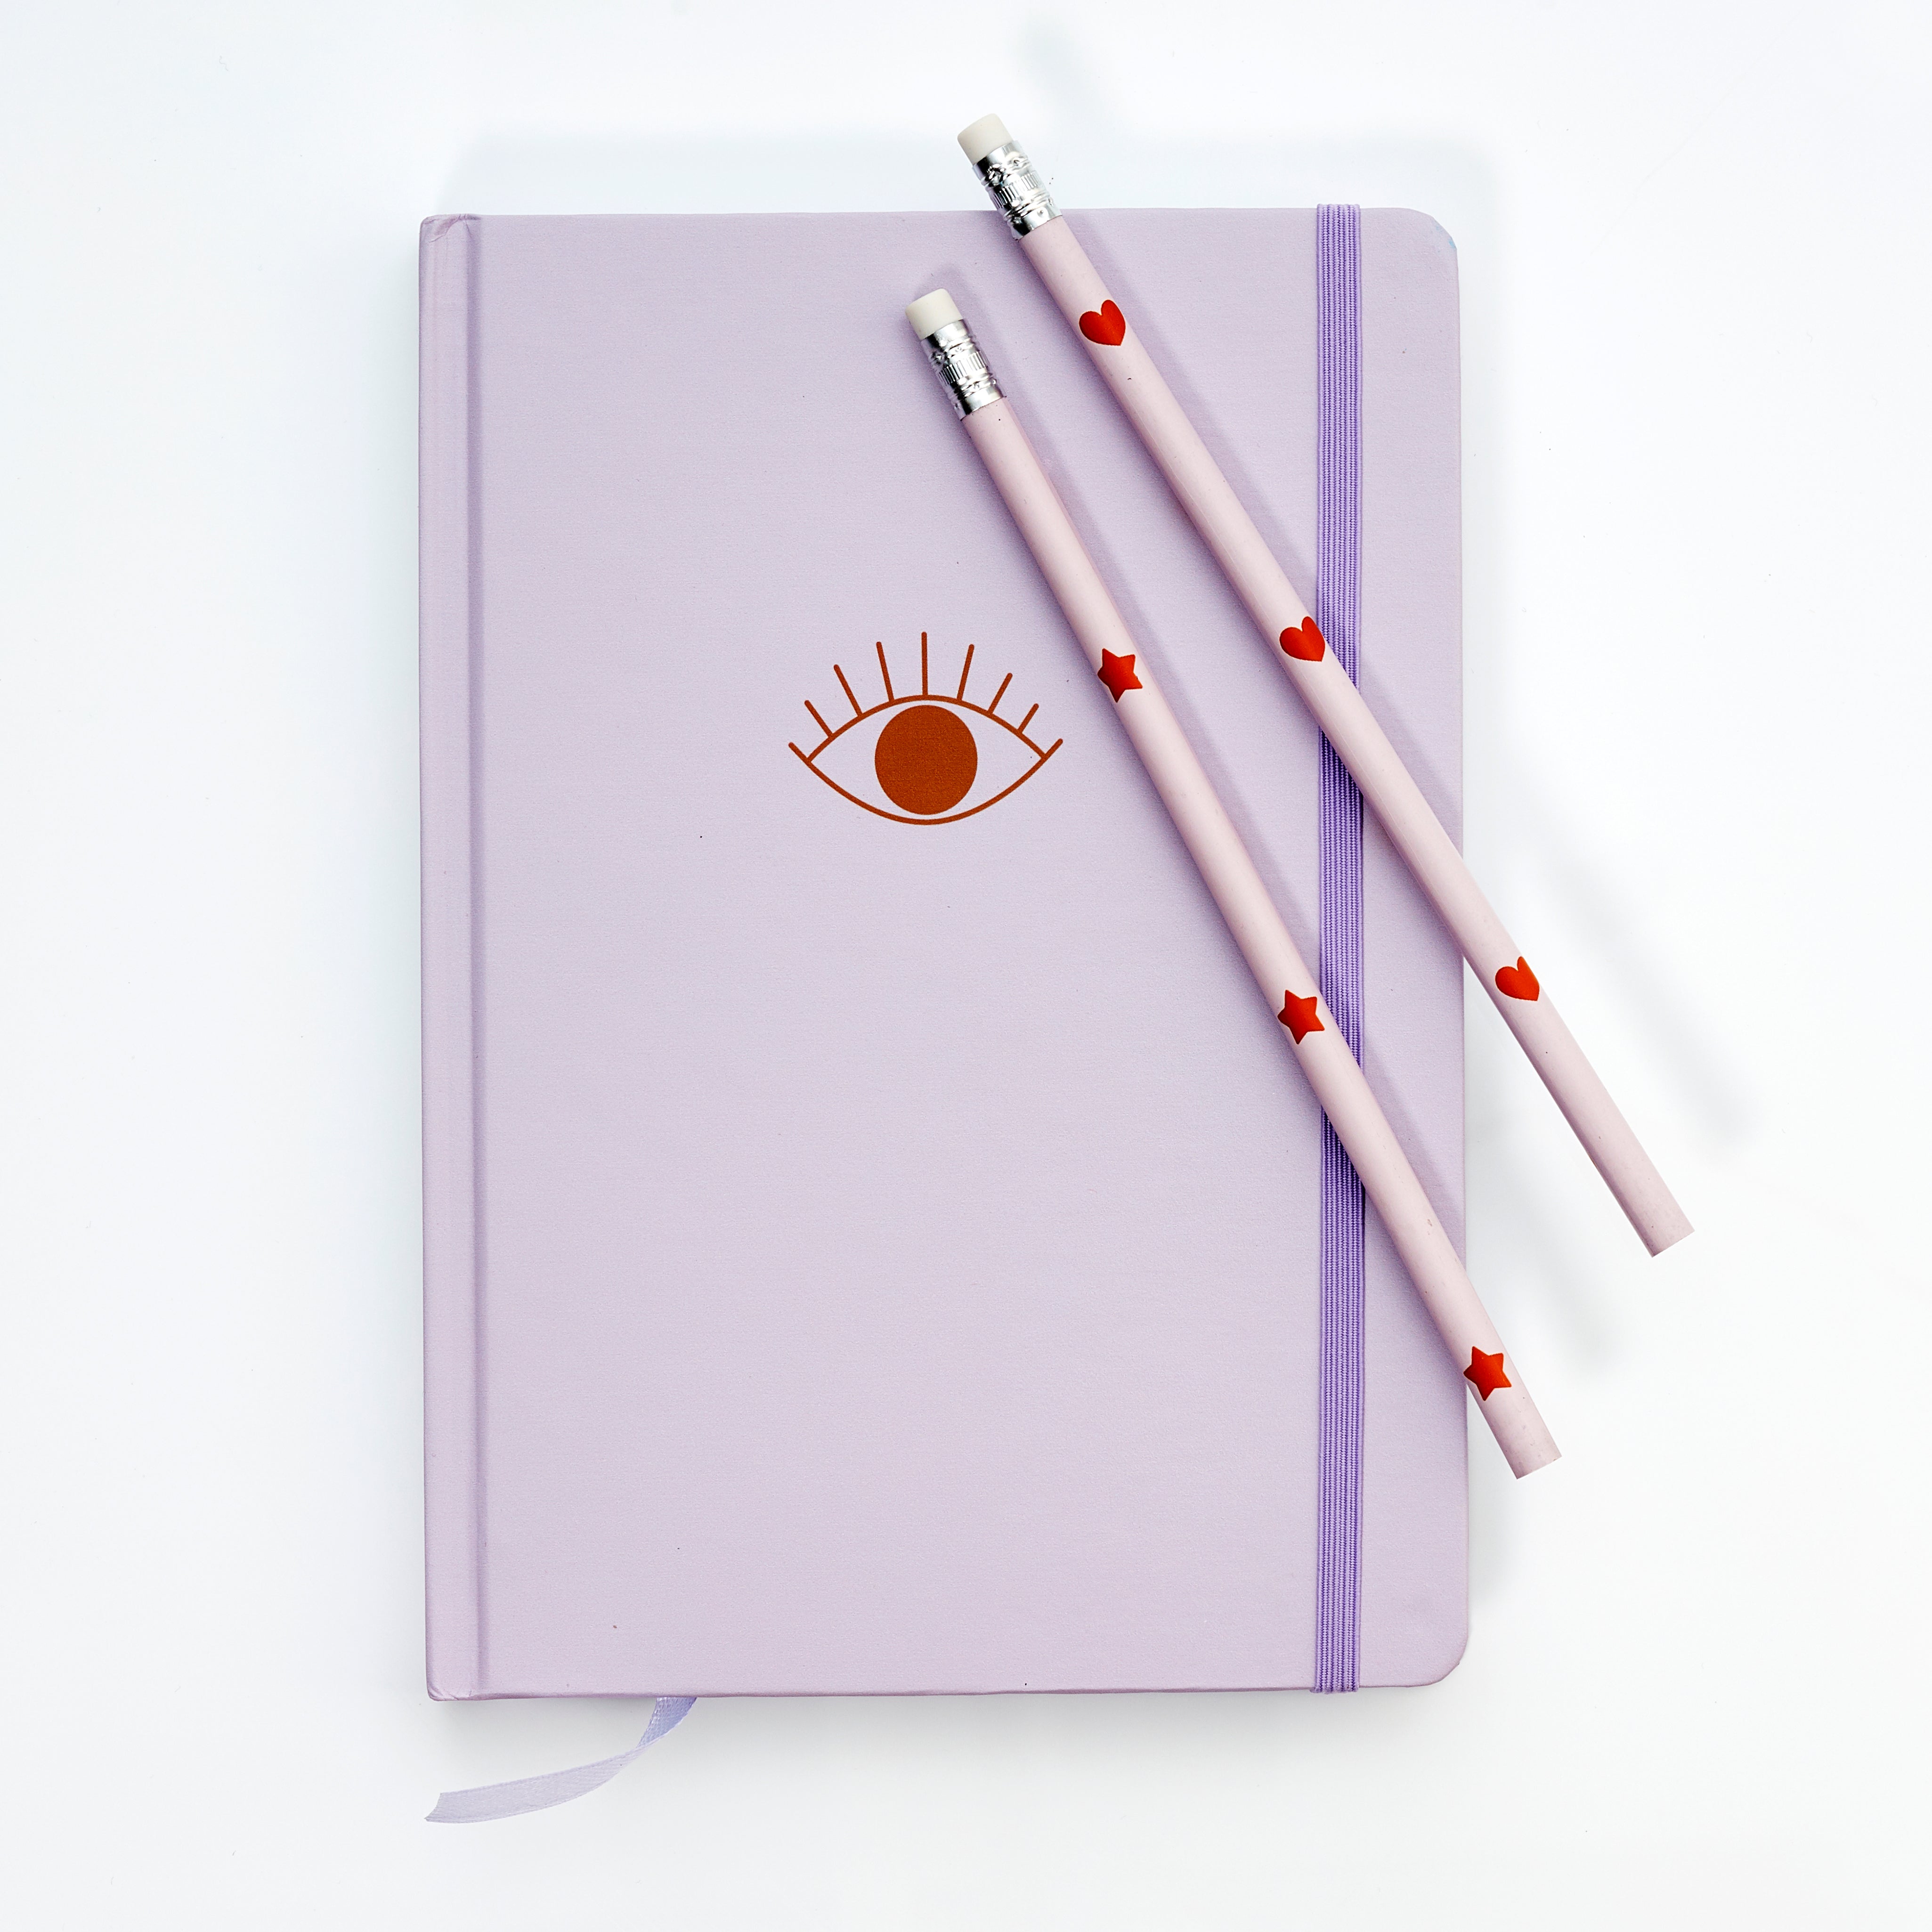 Notebook for the jewelry designer